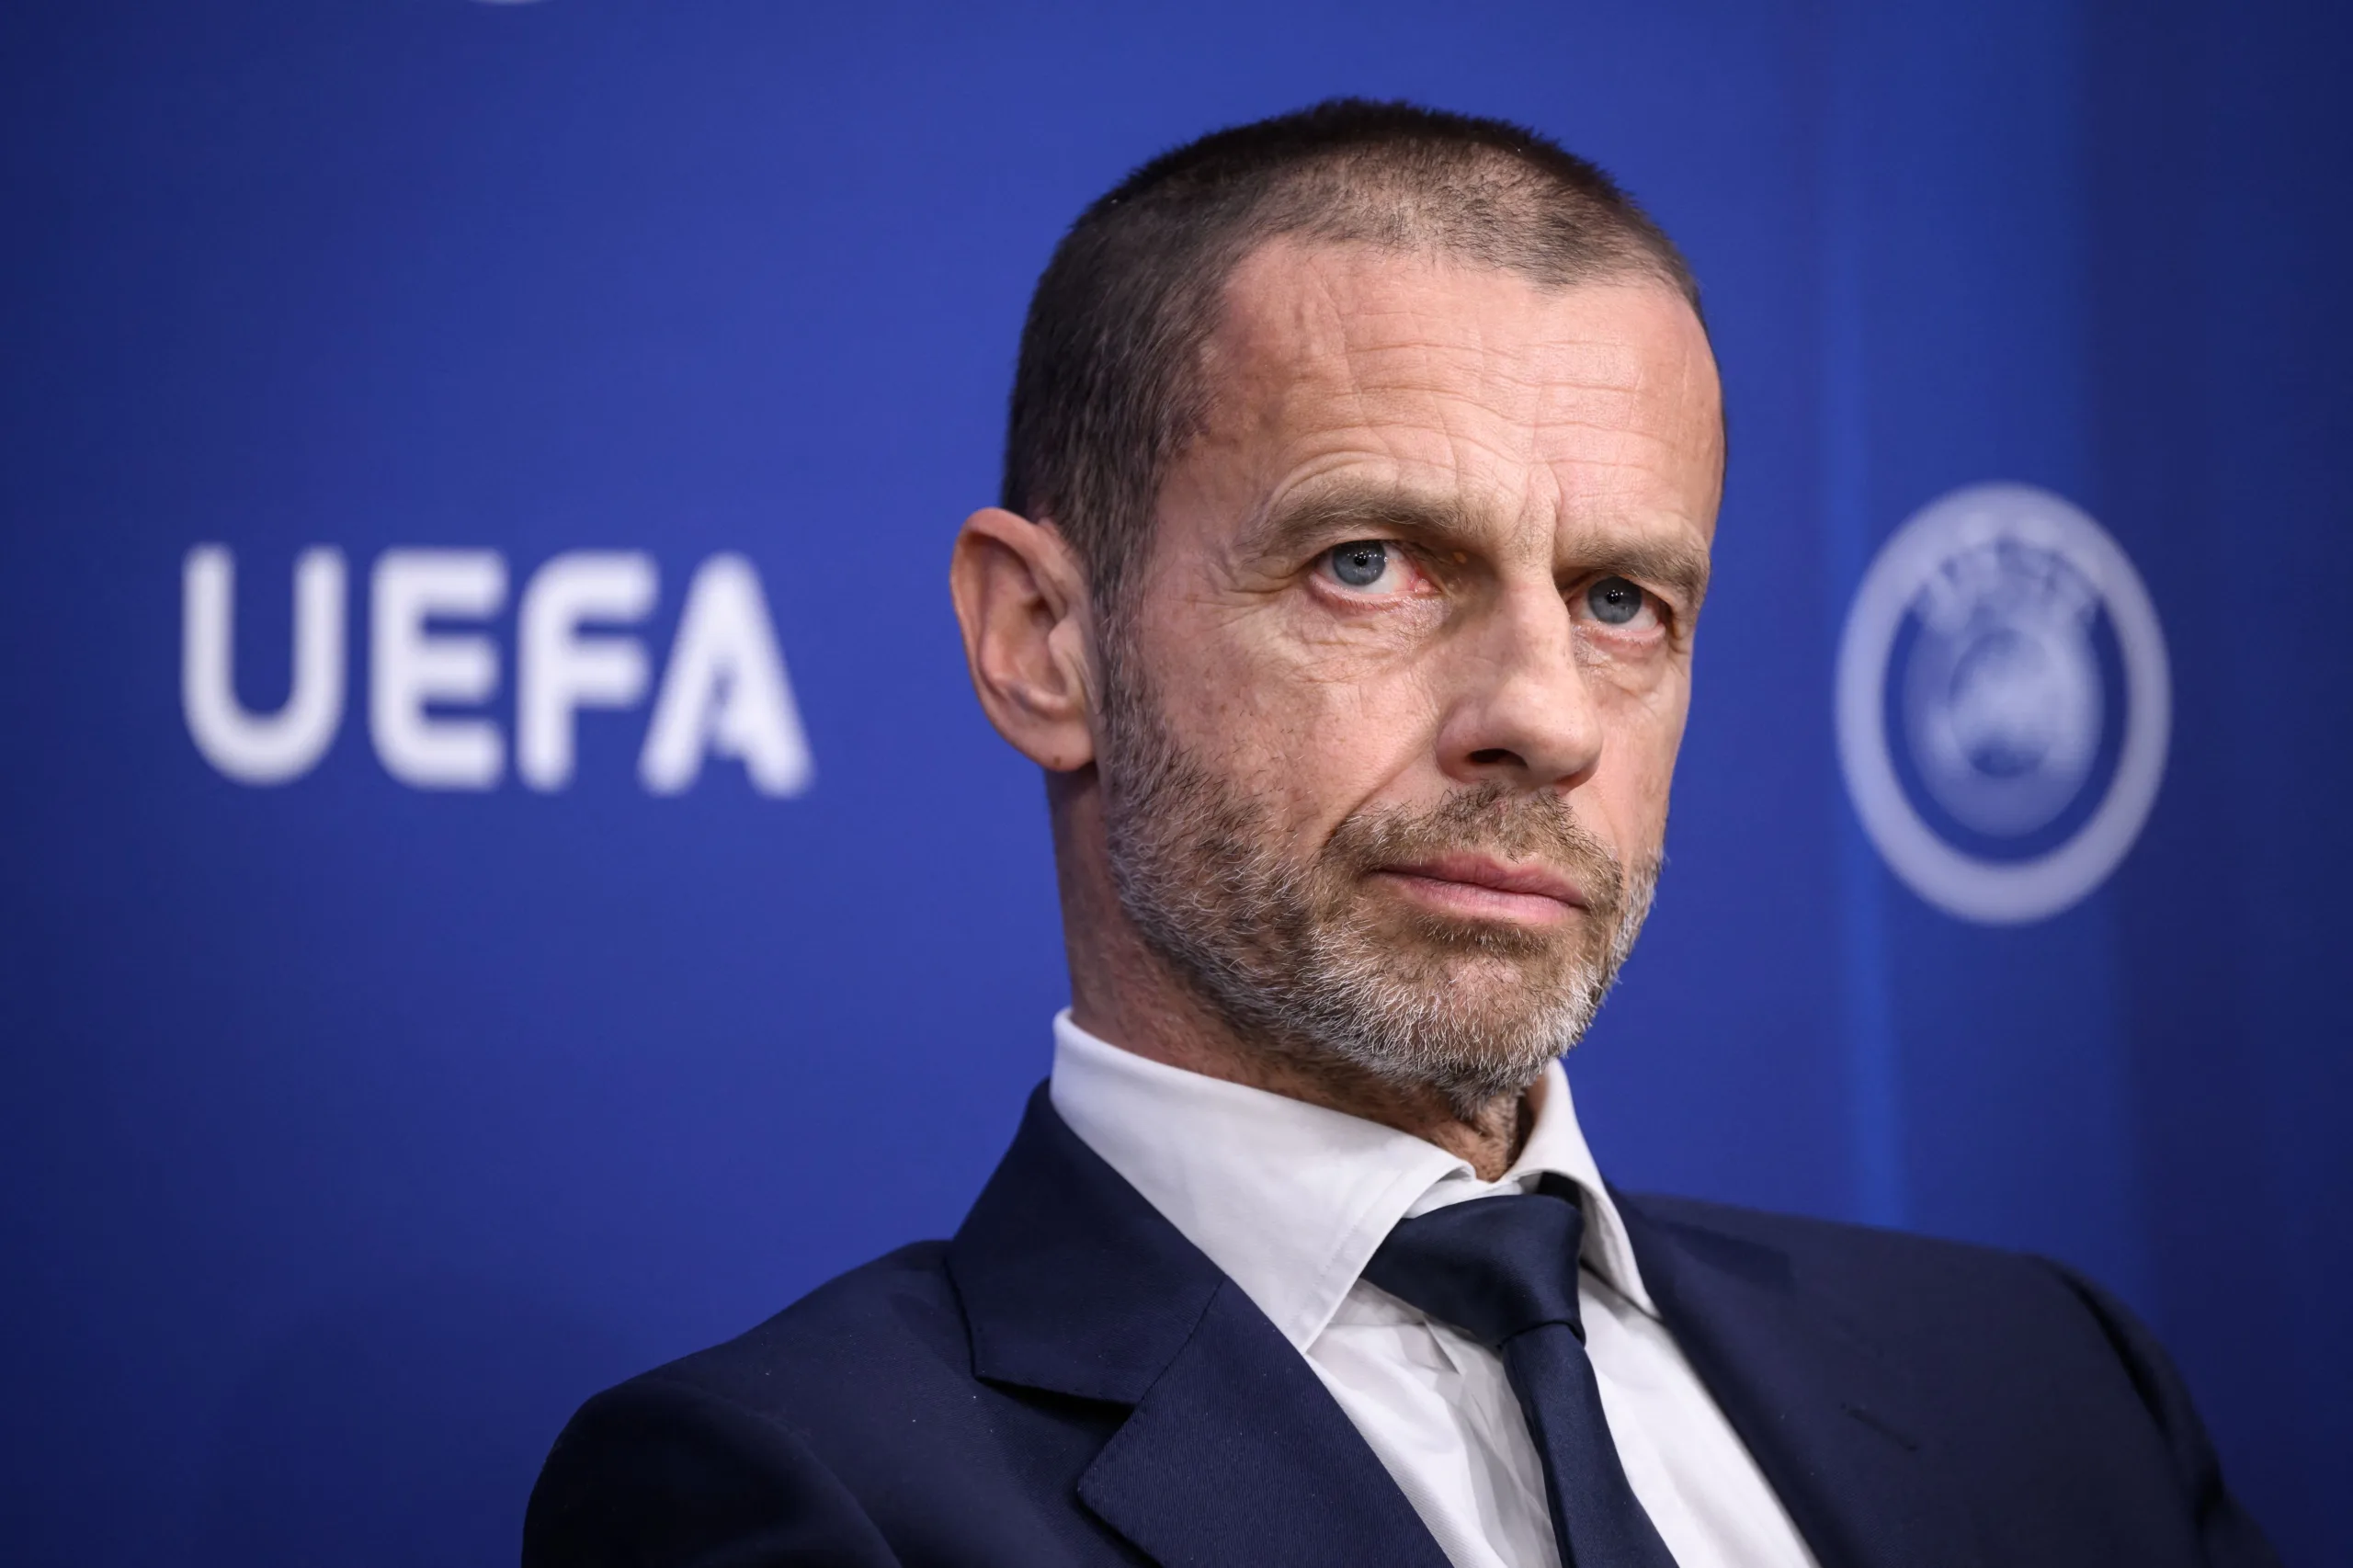 UEFA President, who is changing FFP rules soon